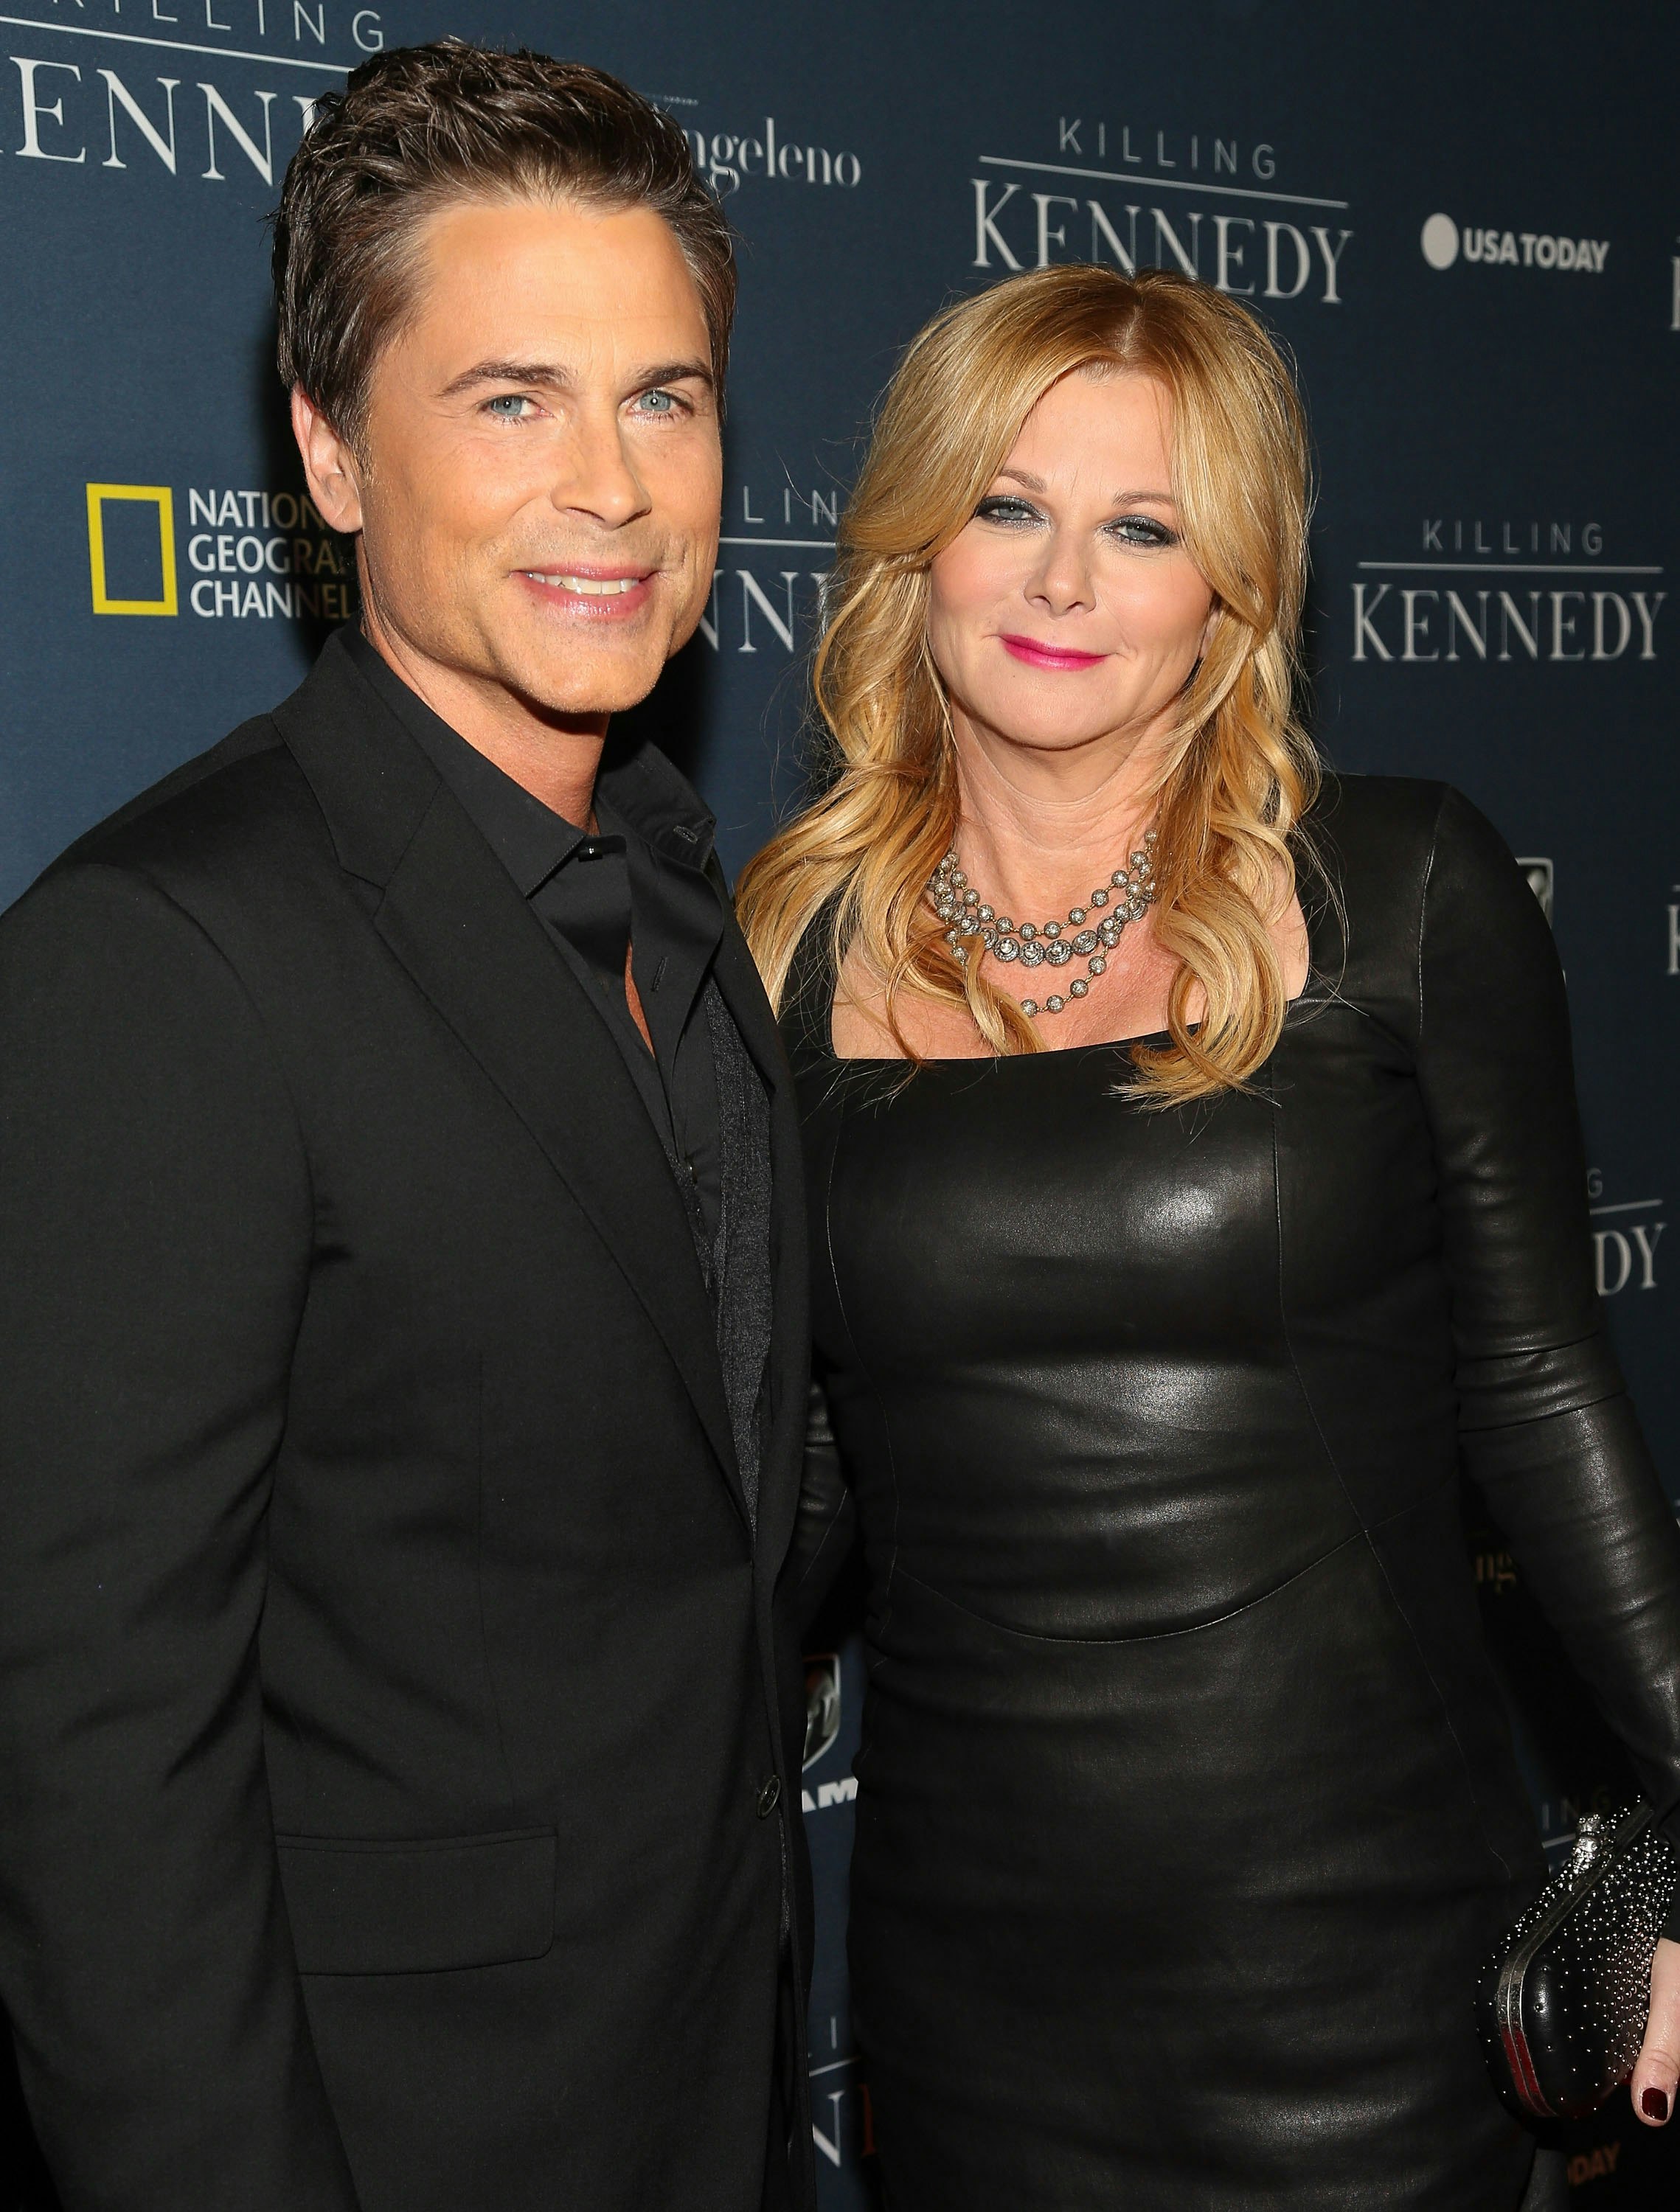 The Untold Truth Of Rob Lowe's Wife Sheryl Berkoff